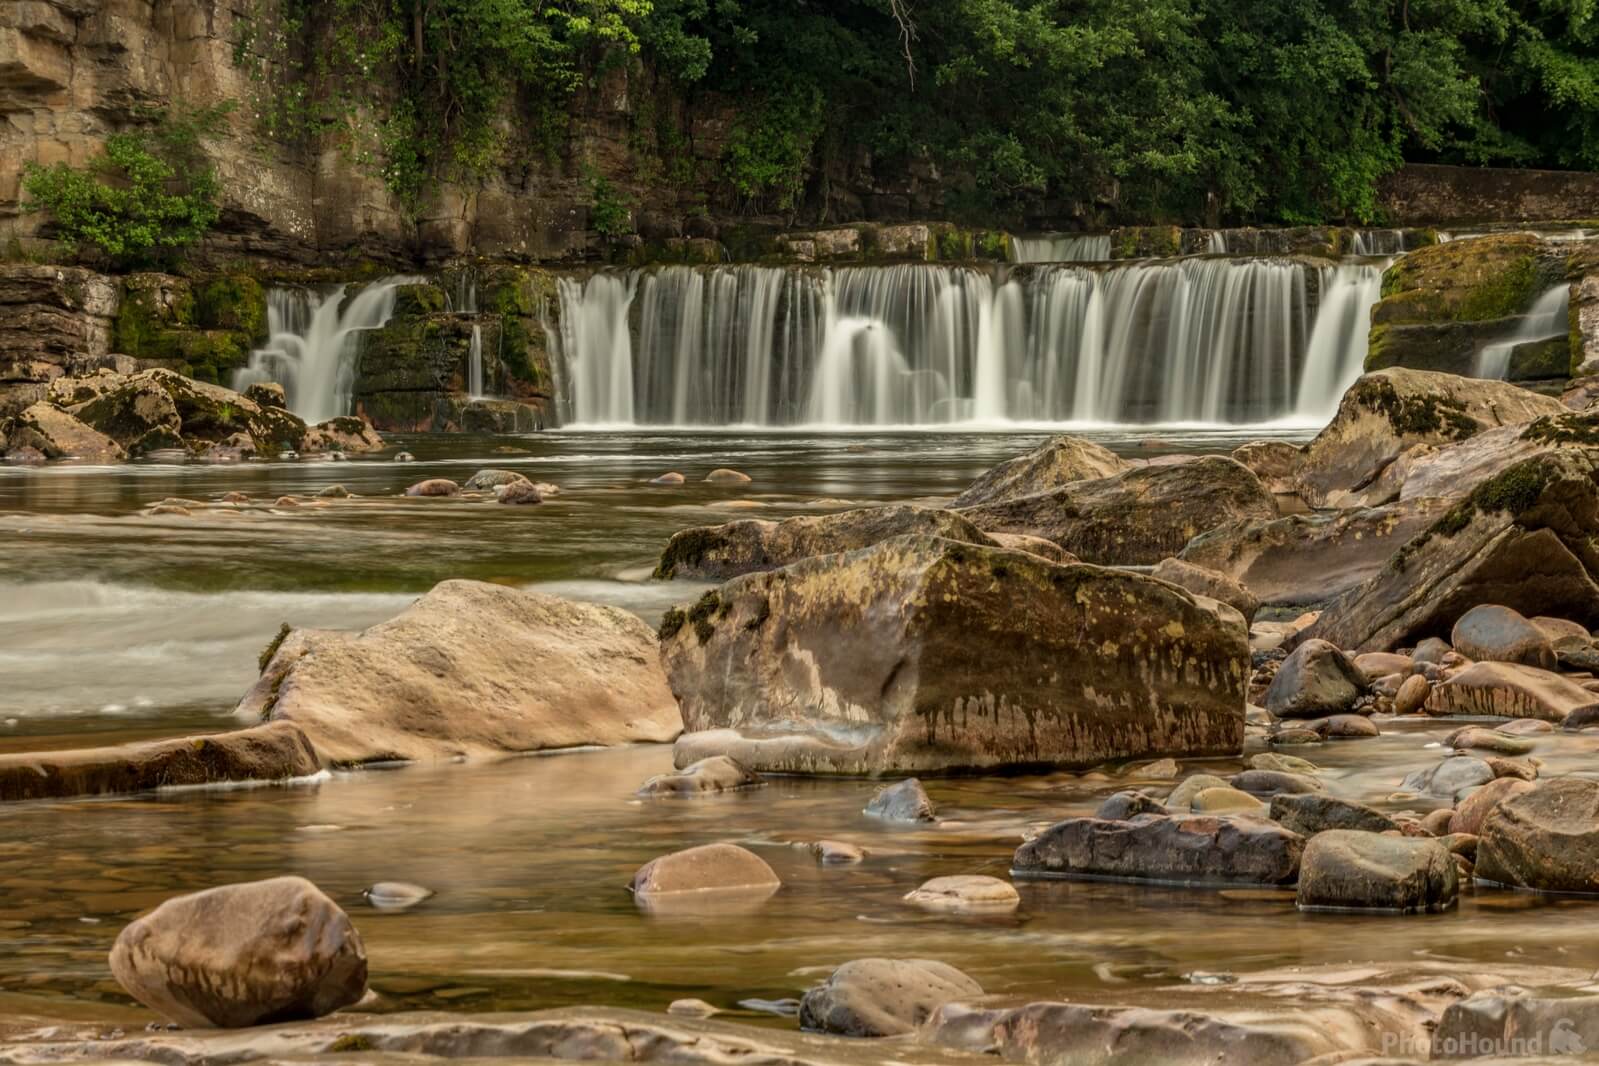 Image of Richmond Falls by Andy Killingbeck